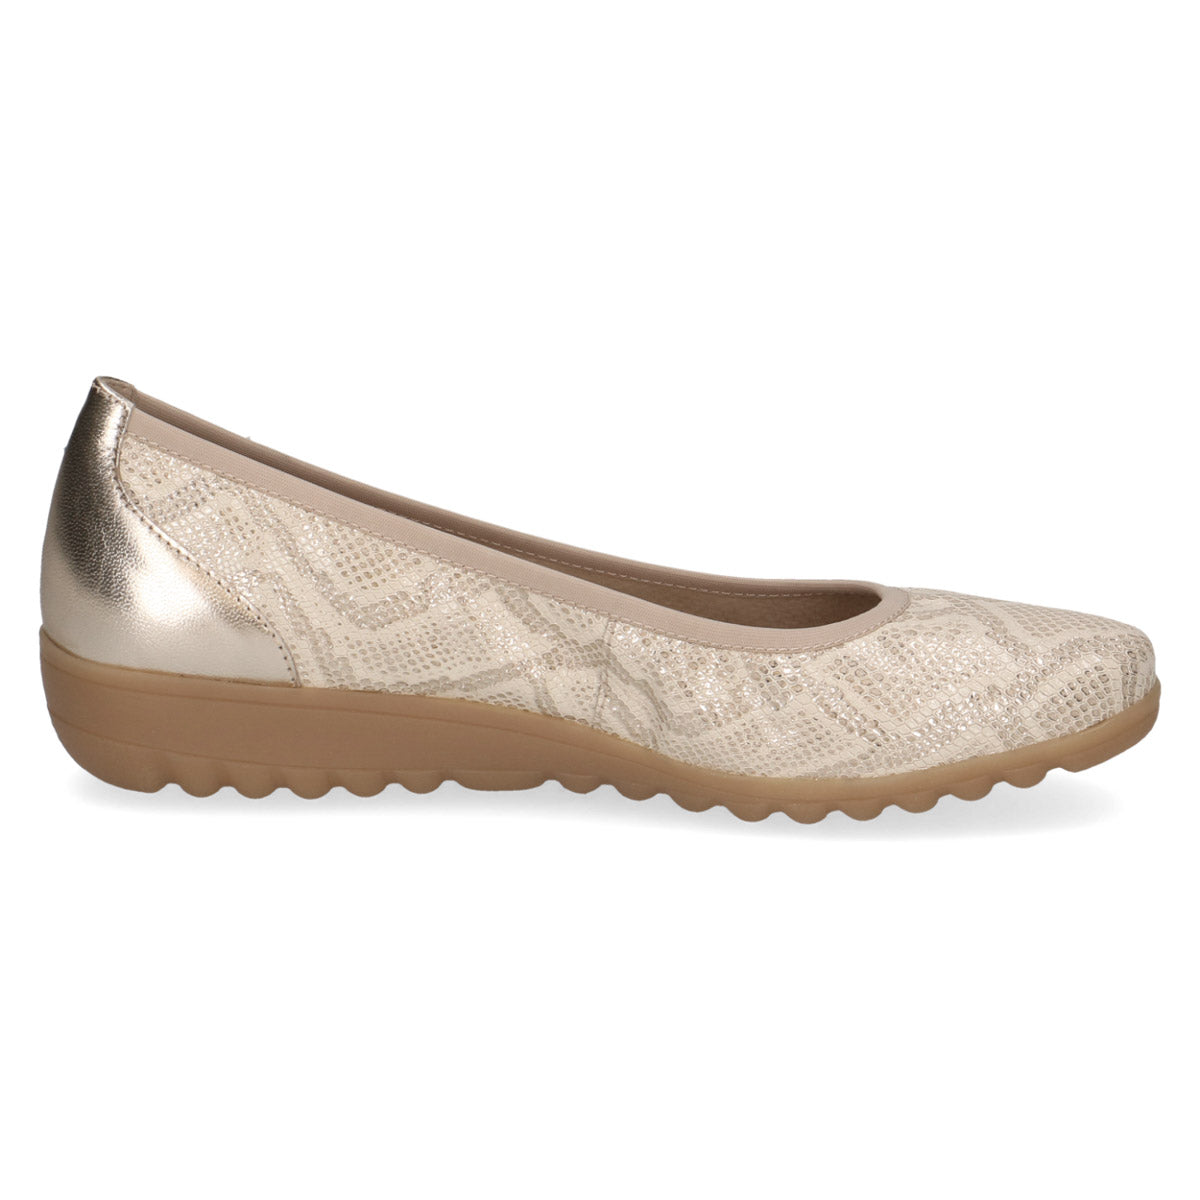 Inside look of the comfortable Caprice Light Gold shoe.